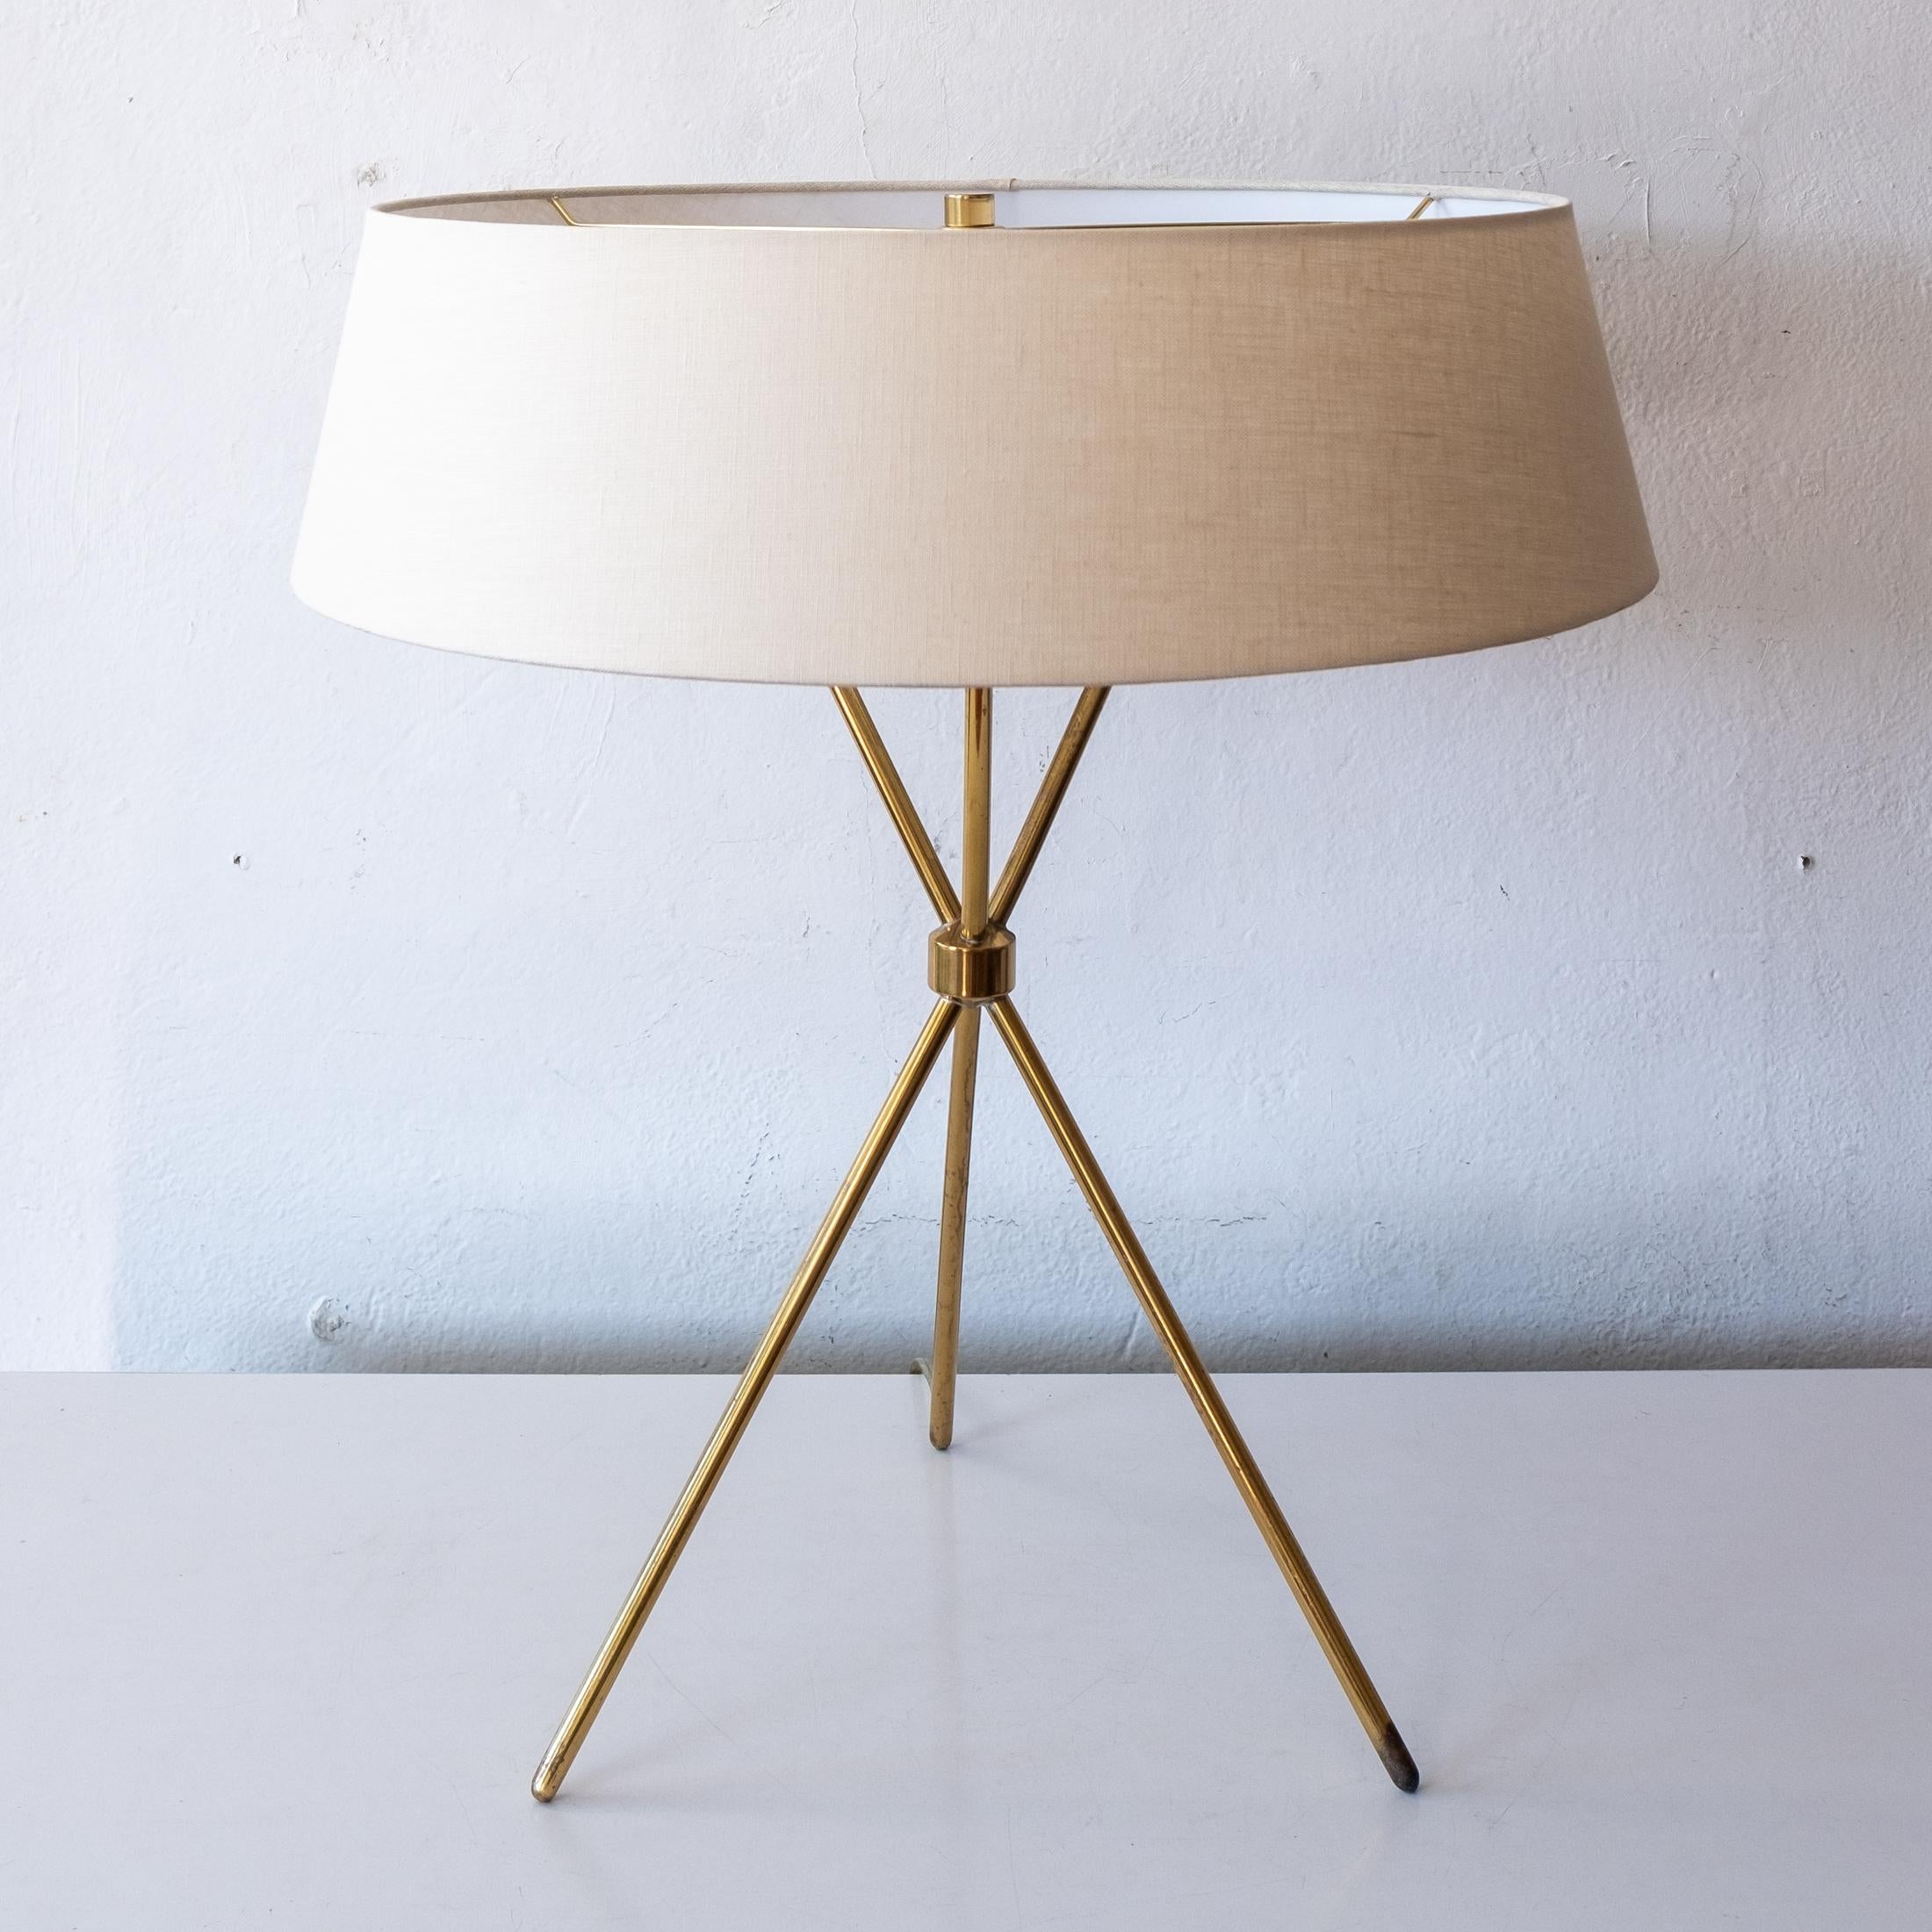 Brass tripod table lamp by Robsjohn-Gibbings for Hansen. Superb quality piece from one of the most refined designers from the mid-century. New shade and diffuser. USA, 1950s.

Measures 18